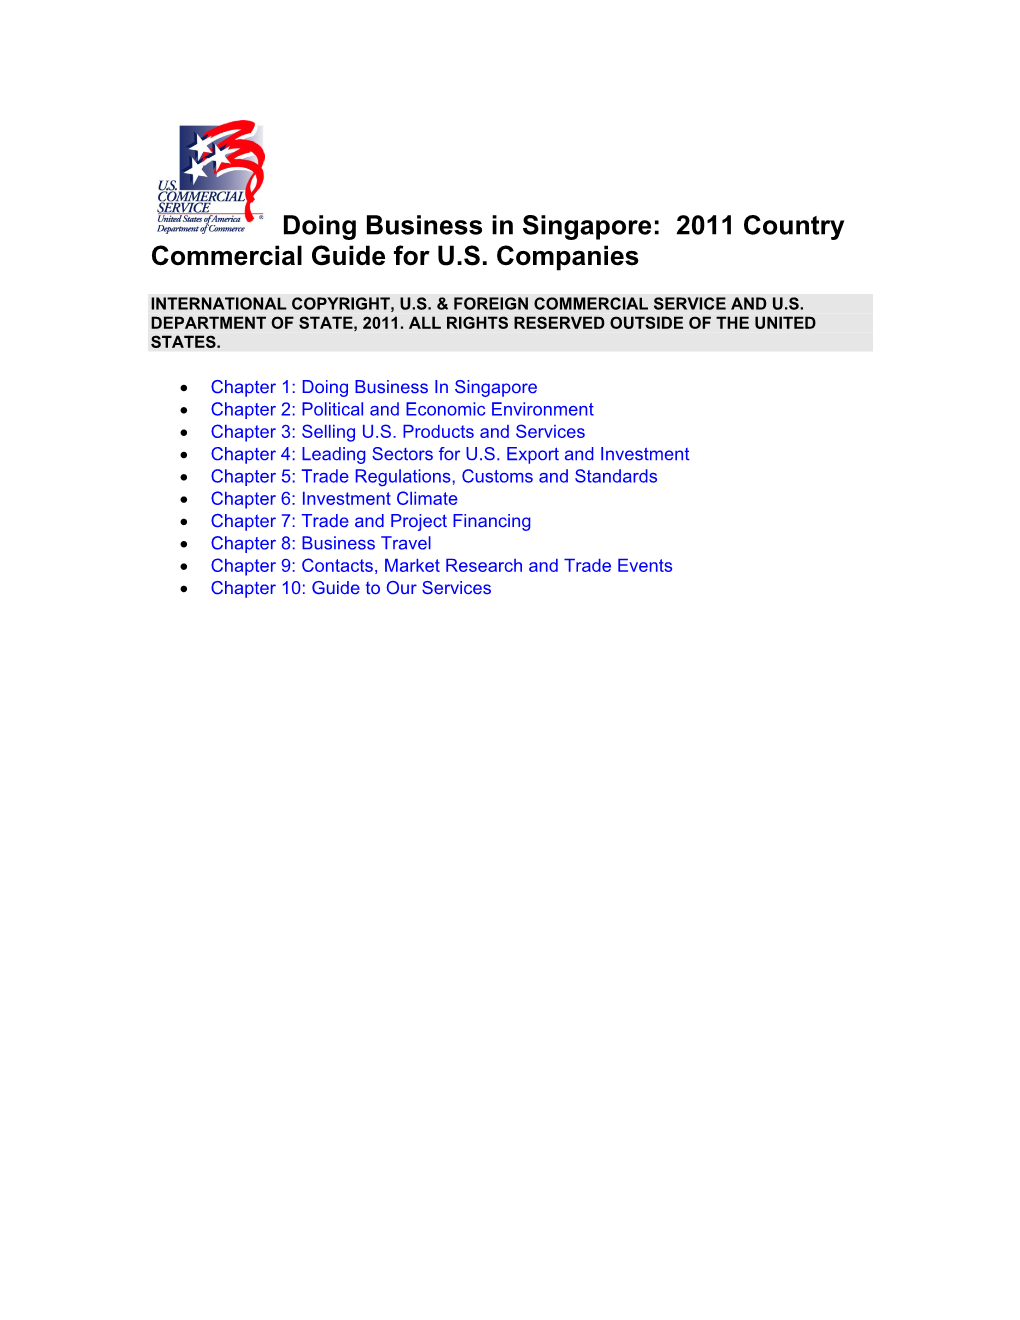 Doing Business in Singapore: 2011 Country Commercial Guide for U.S